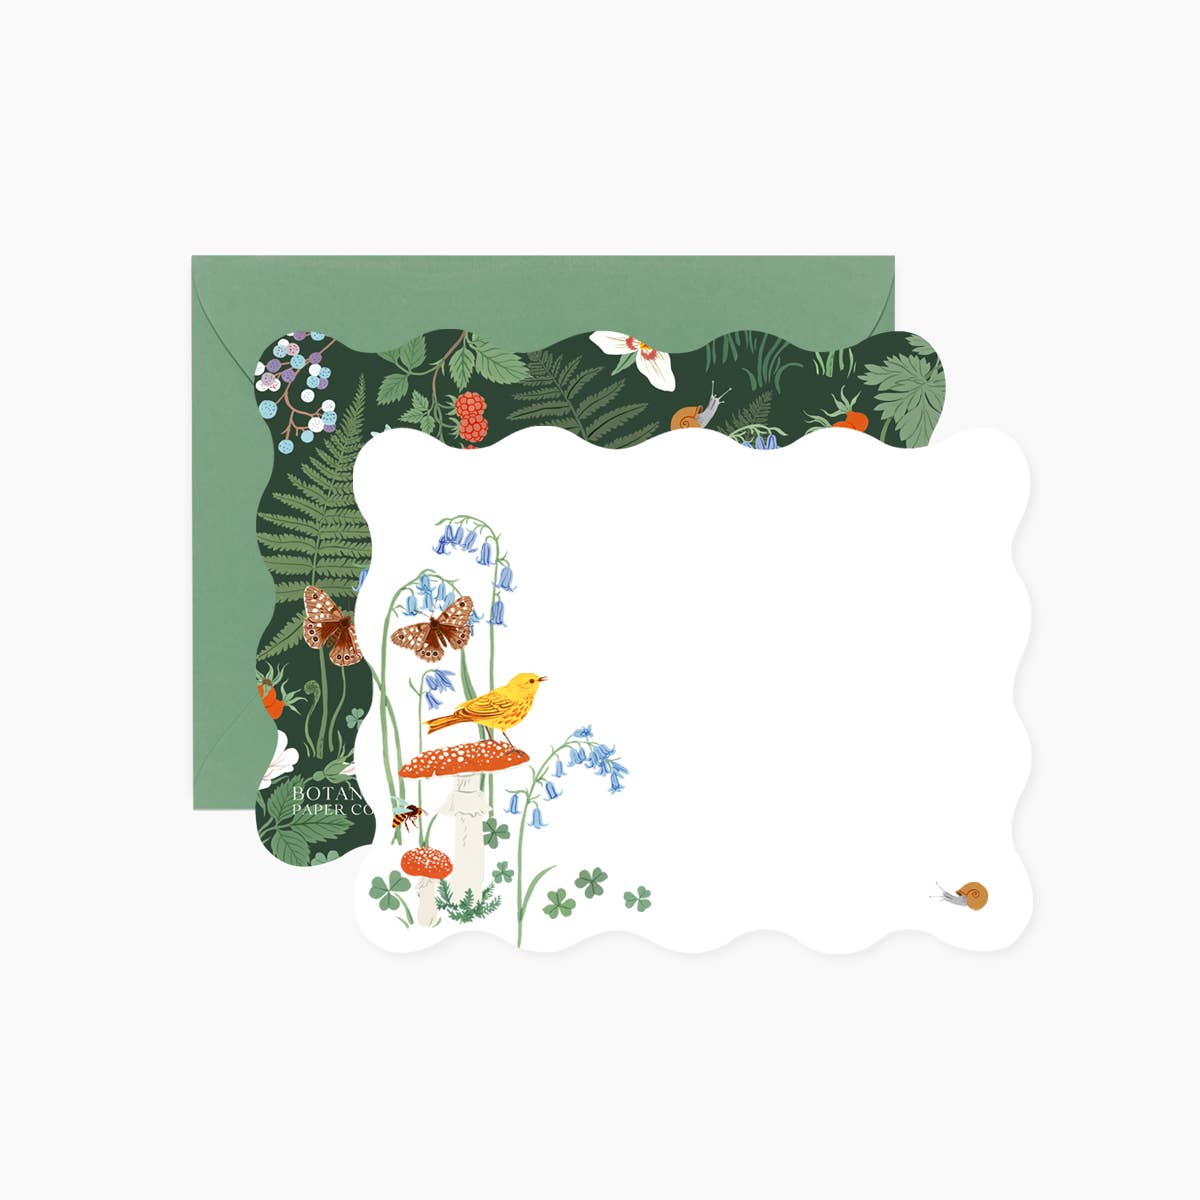 Image of notecard front, back and envelope included. Front has white background with images of red mushroom with yellow bird, blue flowers, and brown butterfly. Back of card has dark green background with images of ferns and flowers.